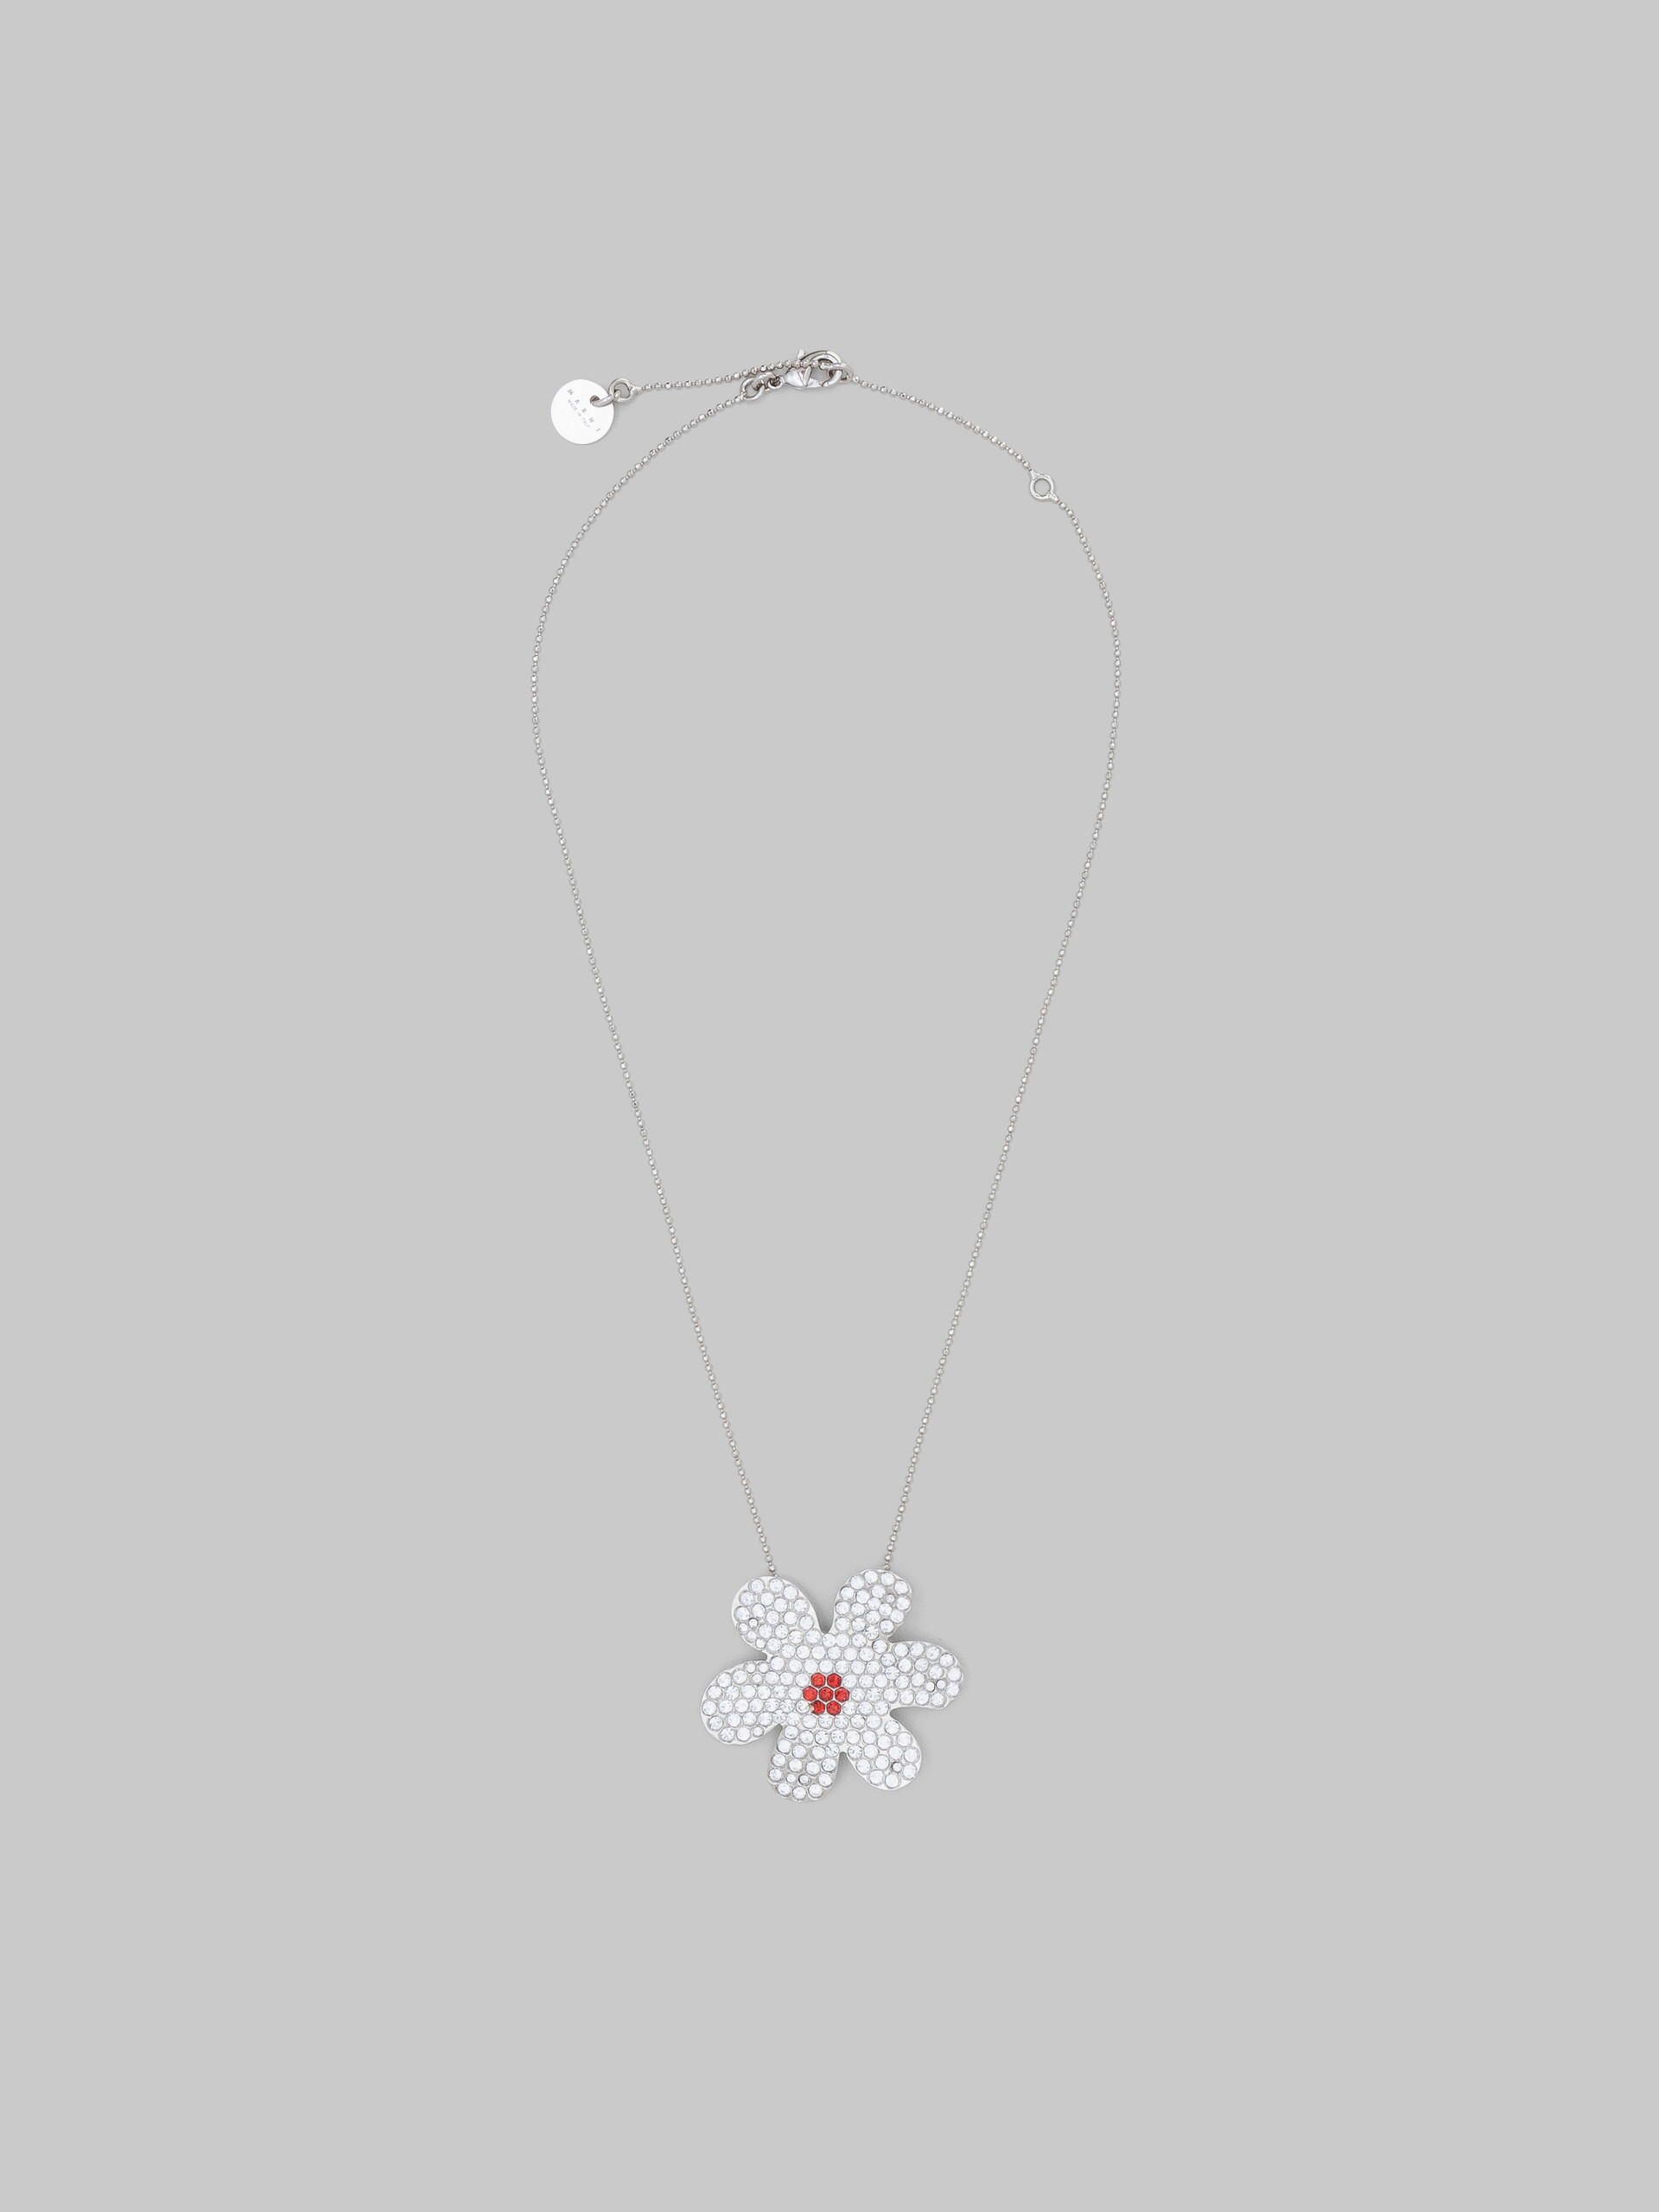 Palladium ball chain necklace with daisy pendant - Necklaces - Image 1